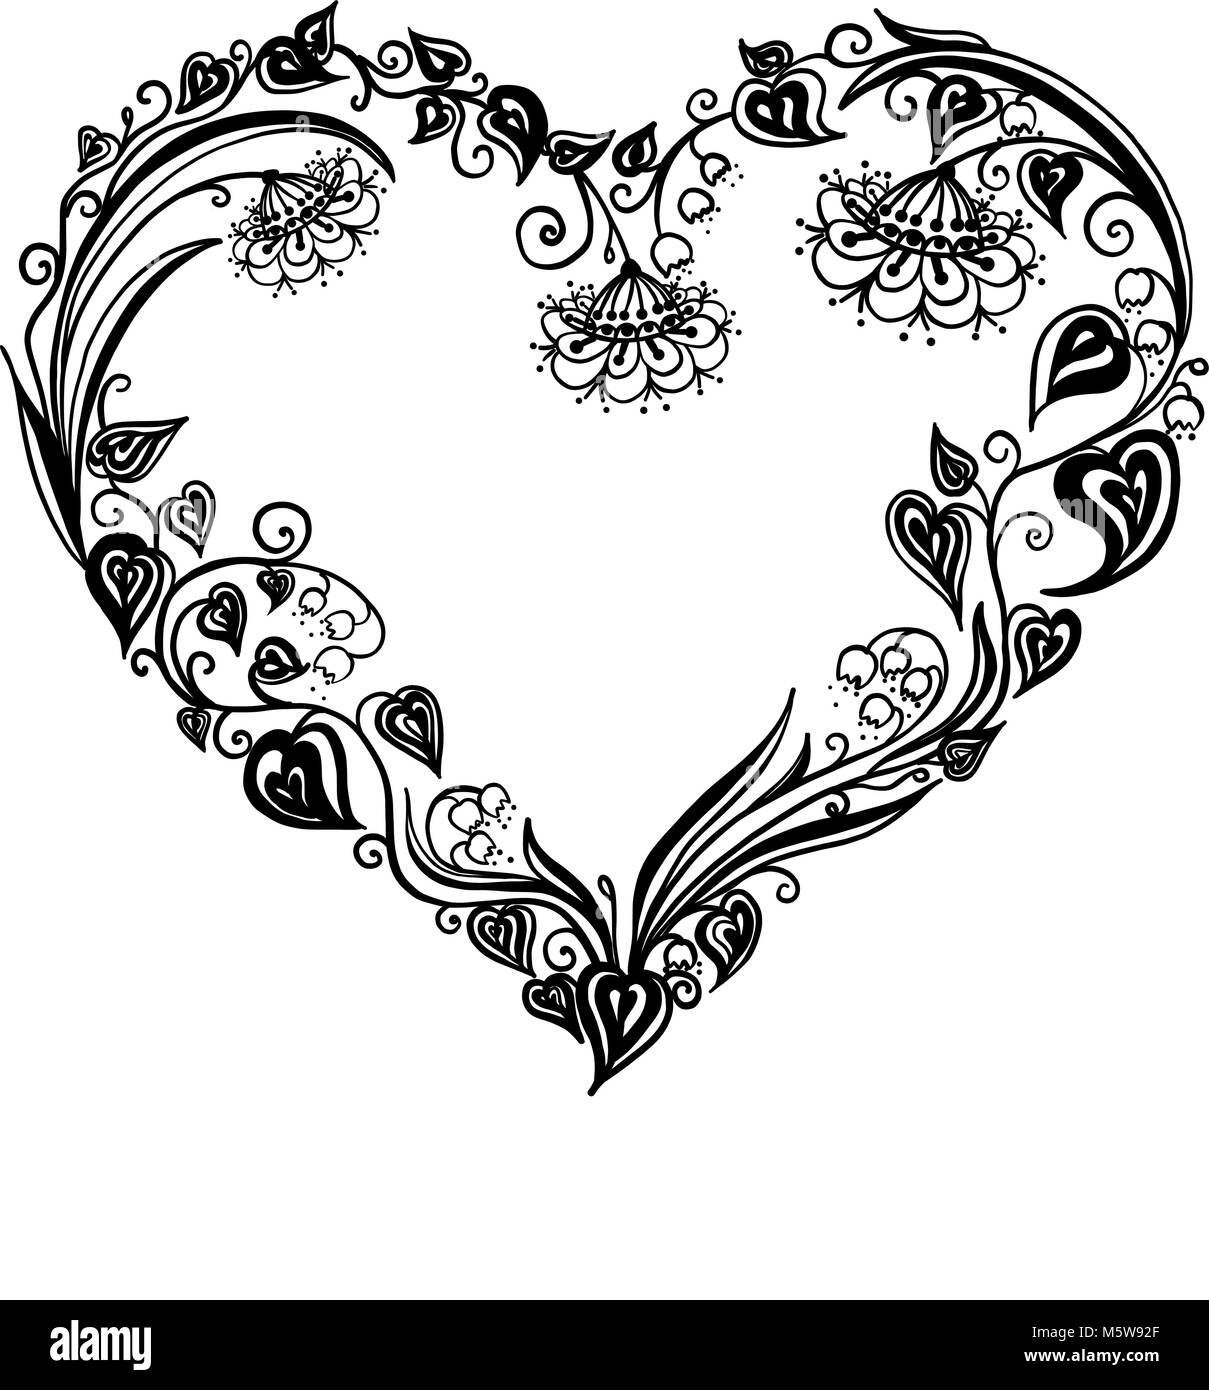 Floral heart. Bouquet composition with hand drawn flowers and plants. Monochrome vector romantic love illustration in sketch style. Valentine Day card Stock Vector